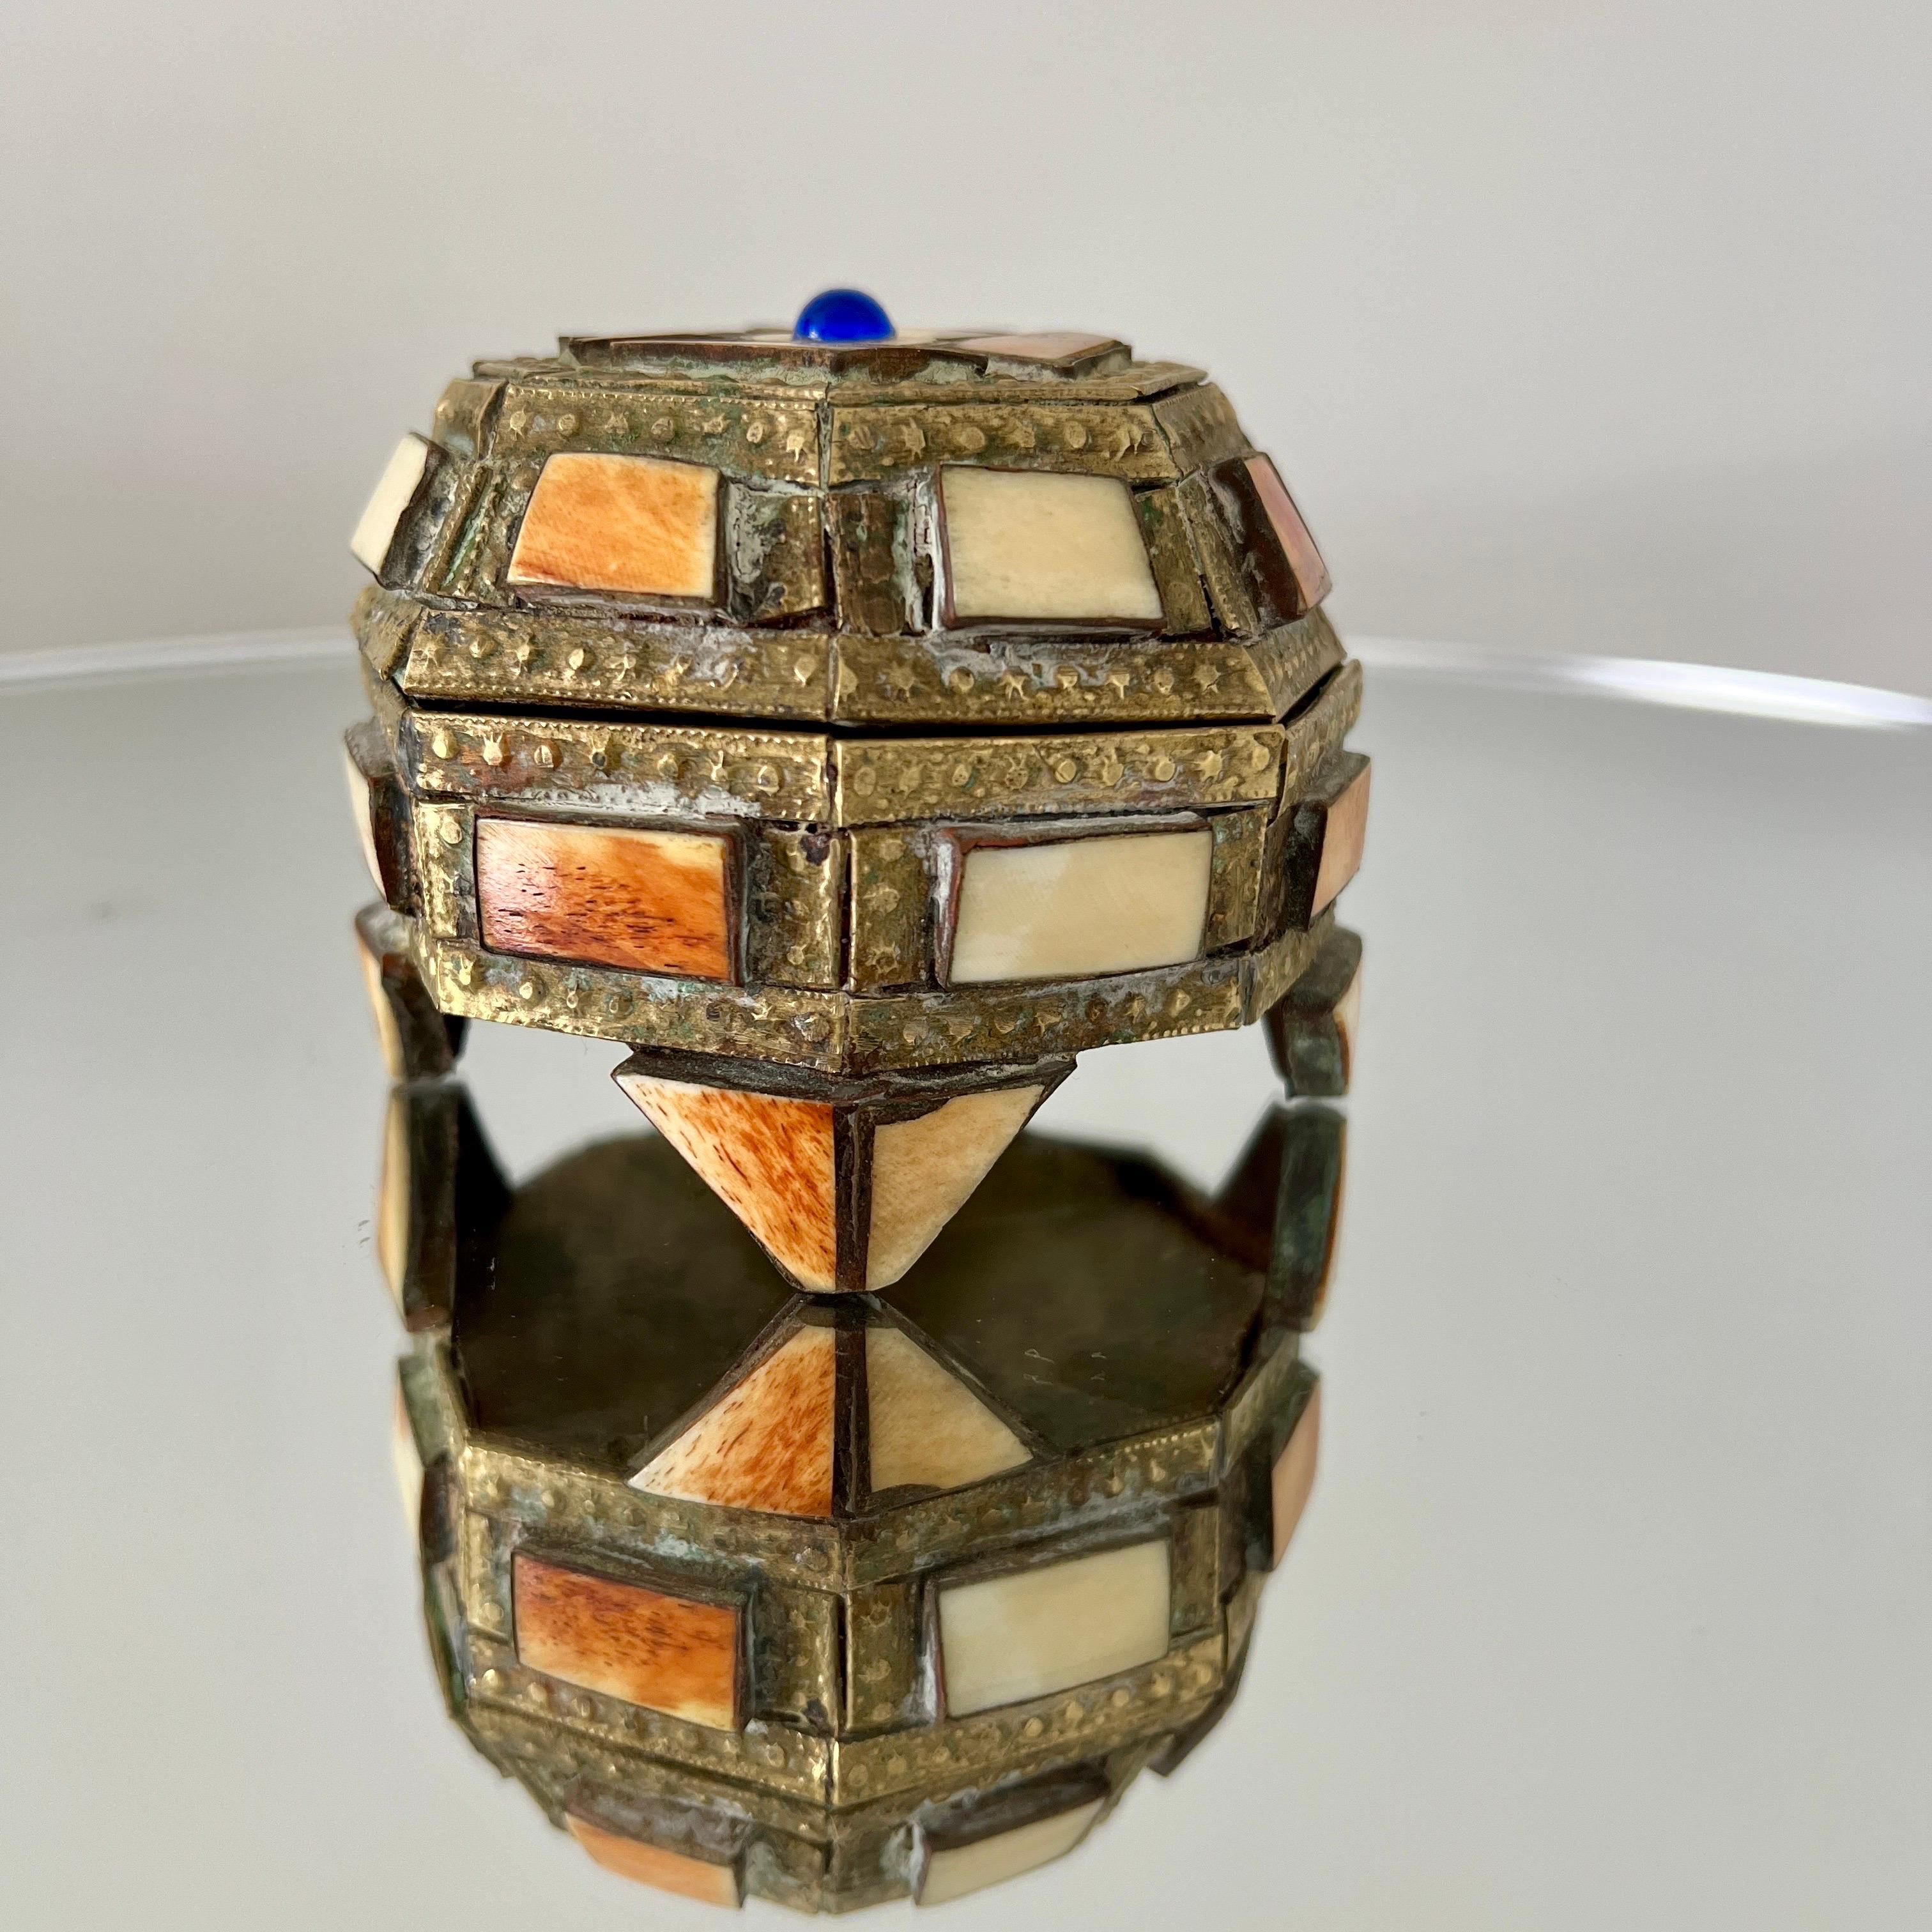 Geometric Trinket Box in Brass with Bone Inlay, Handcrafted in Morocco, 1970's For Sale 2